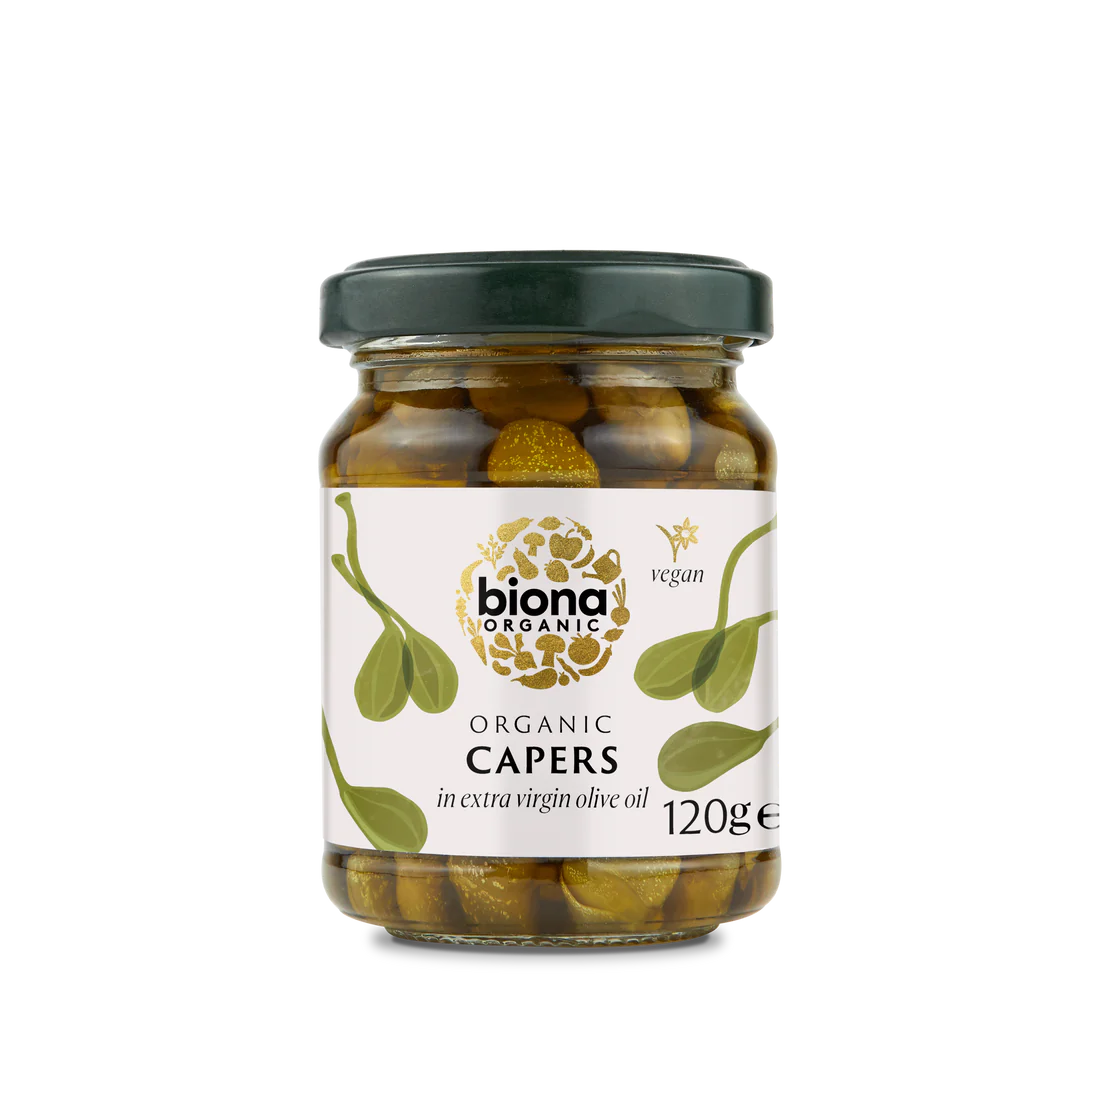 Organic Capers in Extra Virgin Olive Oil - 120g